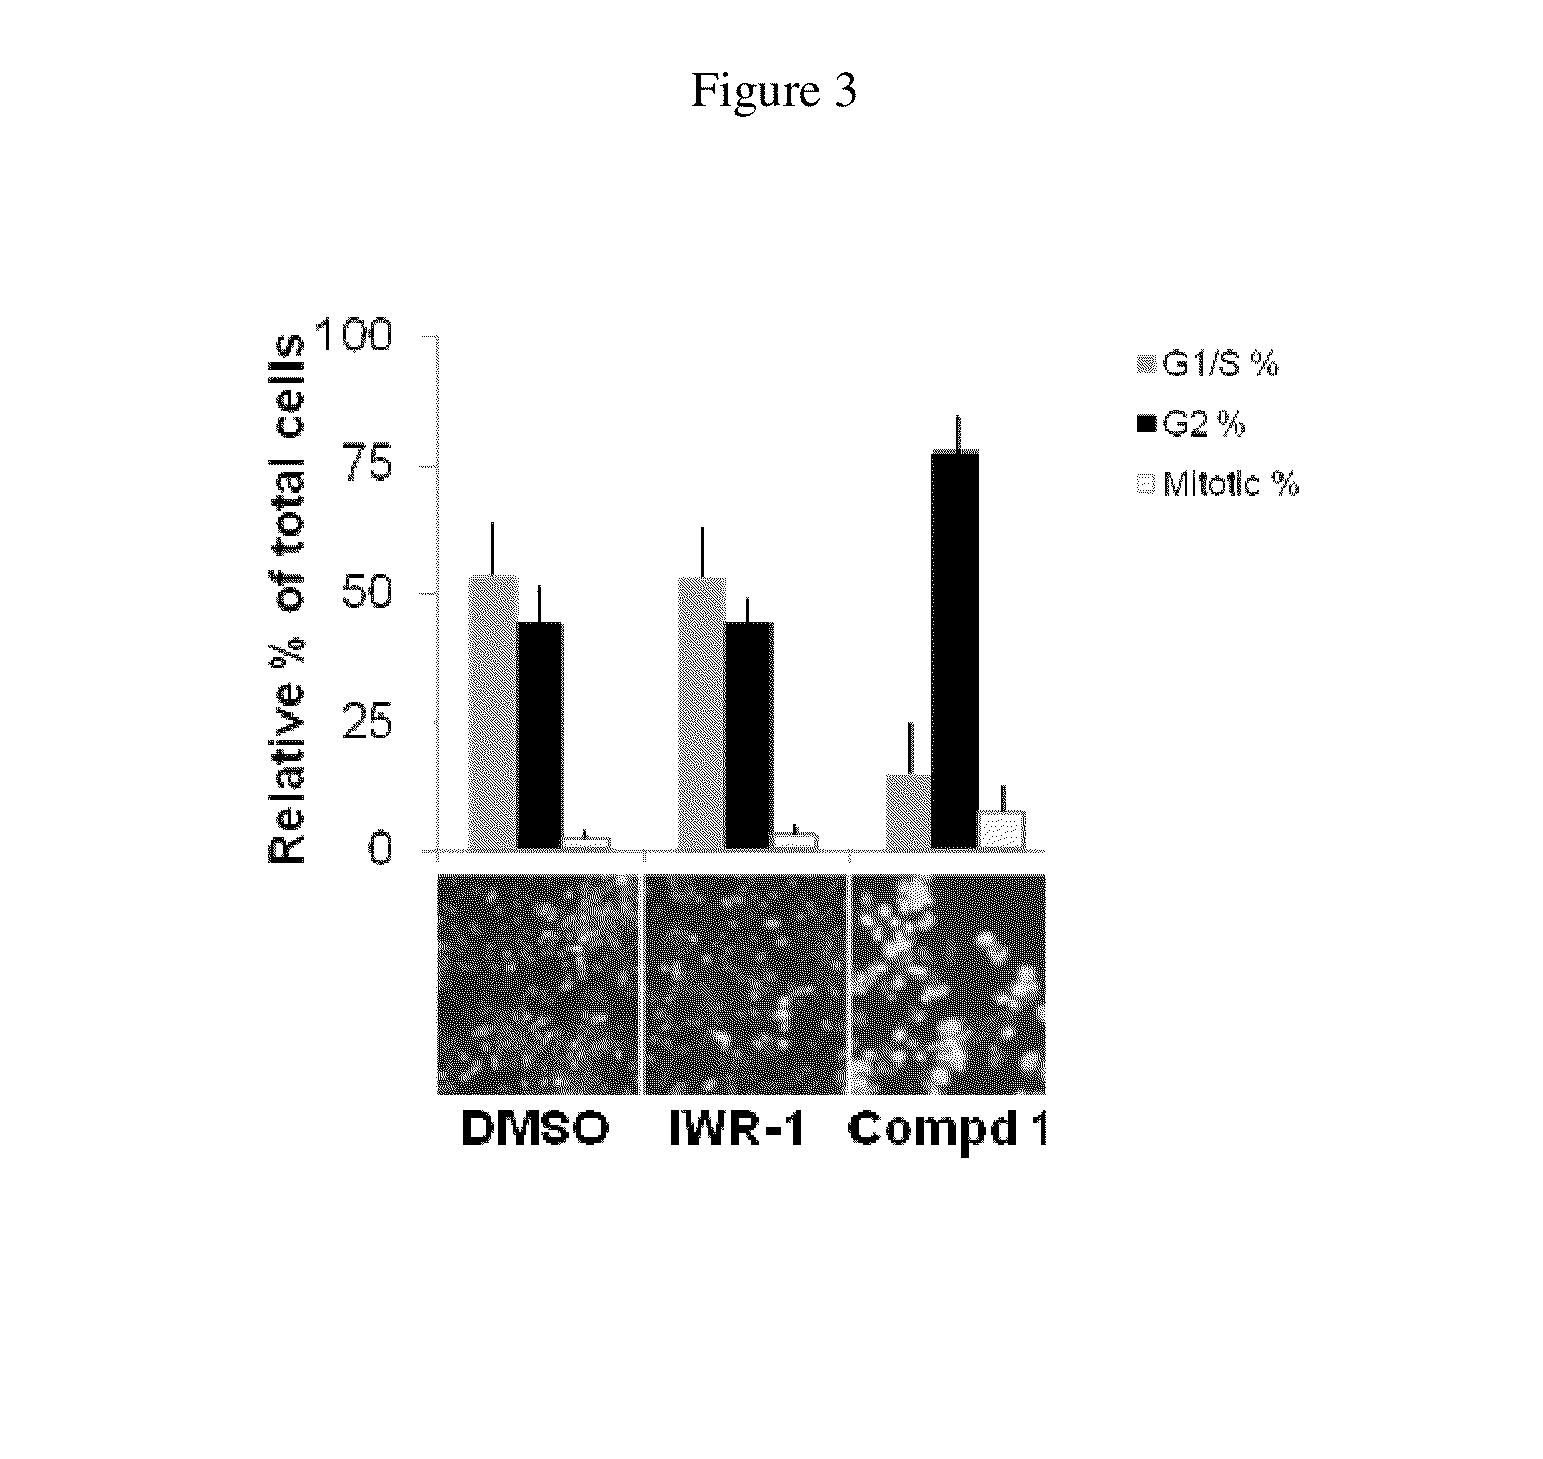 Compounds for inhibition of cancer cell proliferation